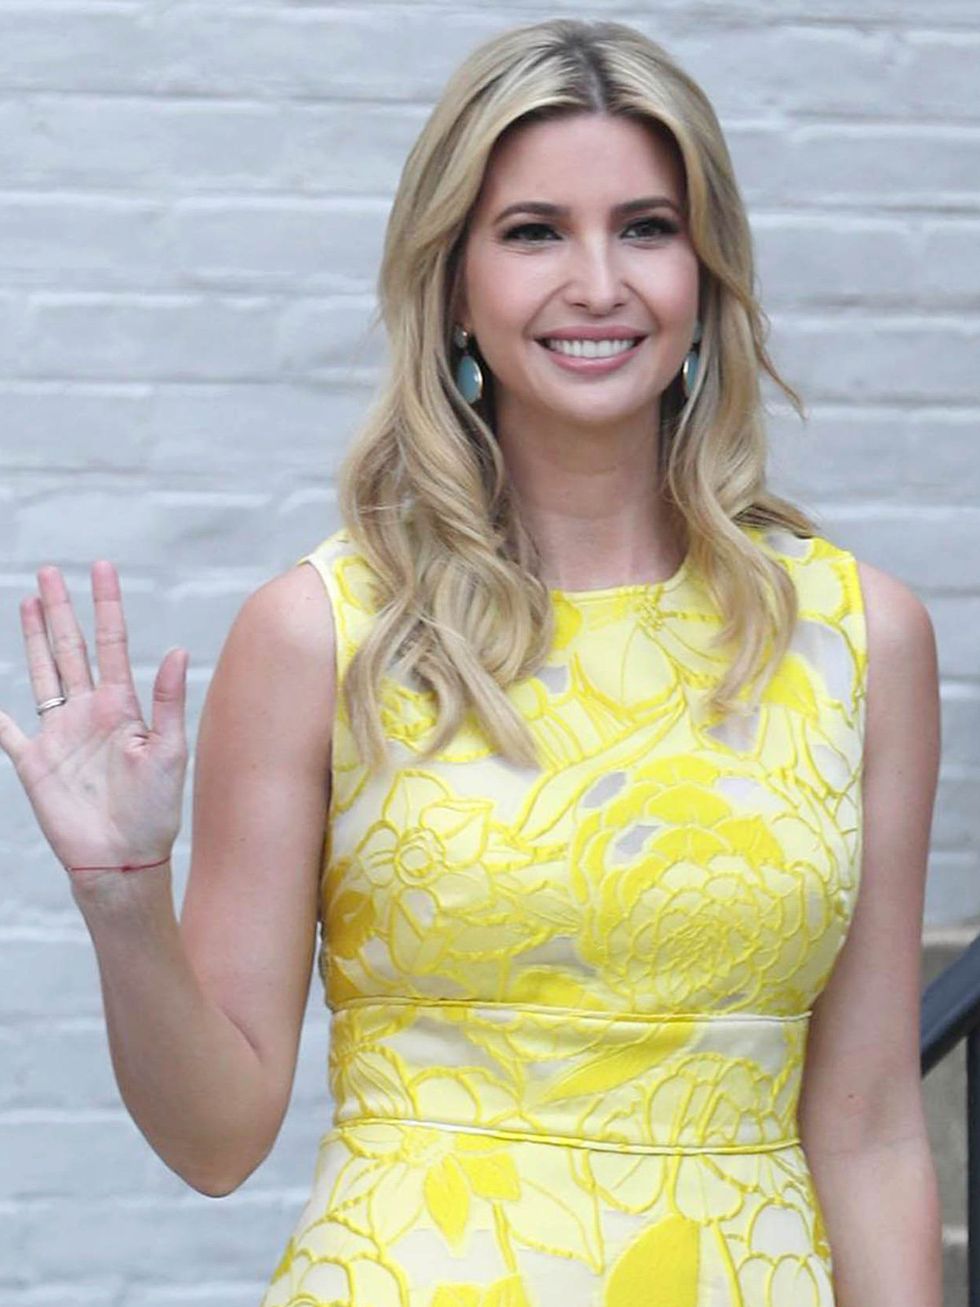 Hair, Yellow, Blond, Hairstyle, Dress, Smile, Long hair, Photo shoot, Cocktail dress, Neck, 